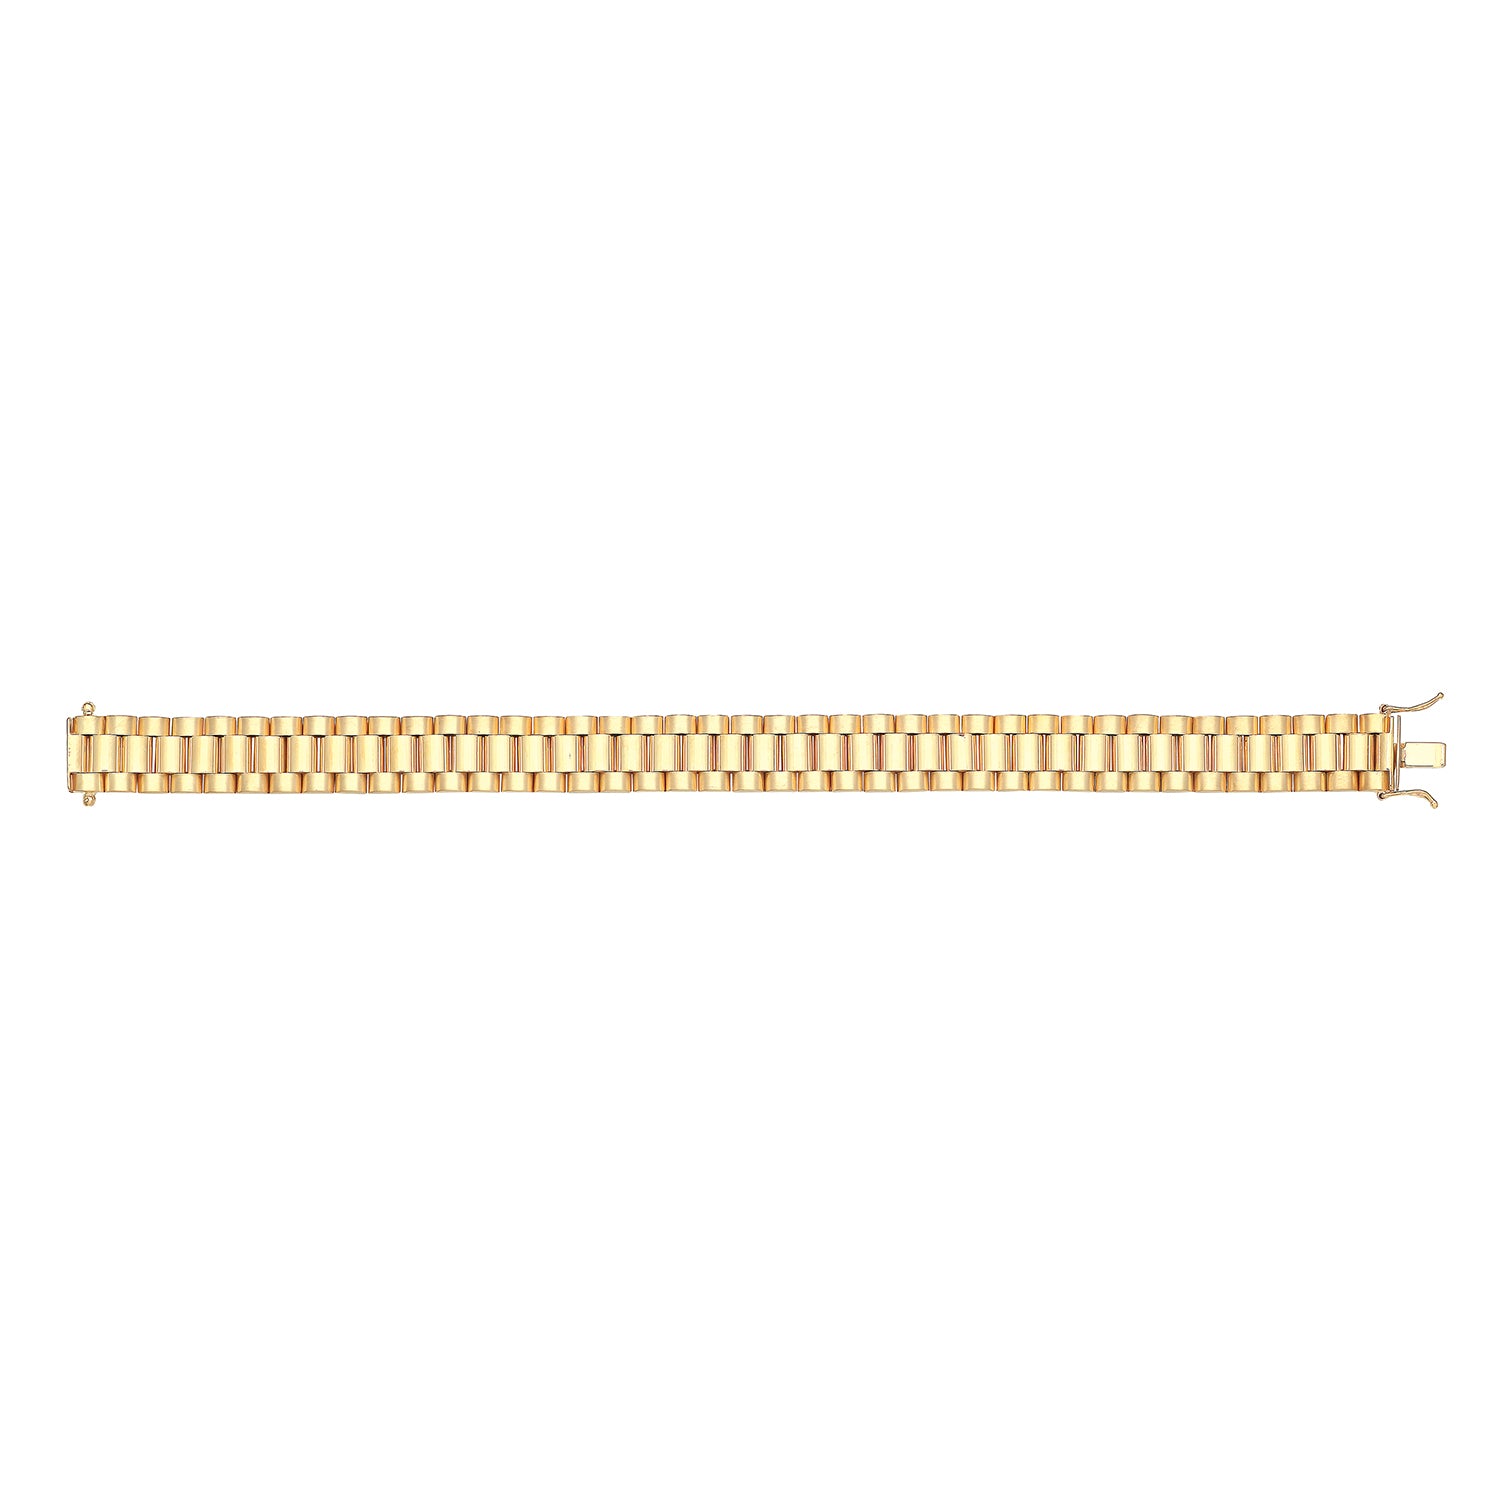 9CT GOLD GENTS' WATCH STRAP BRACLET